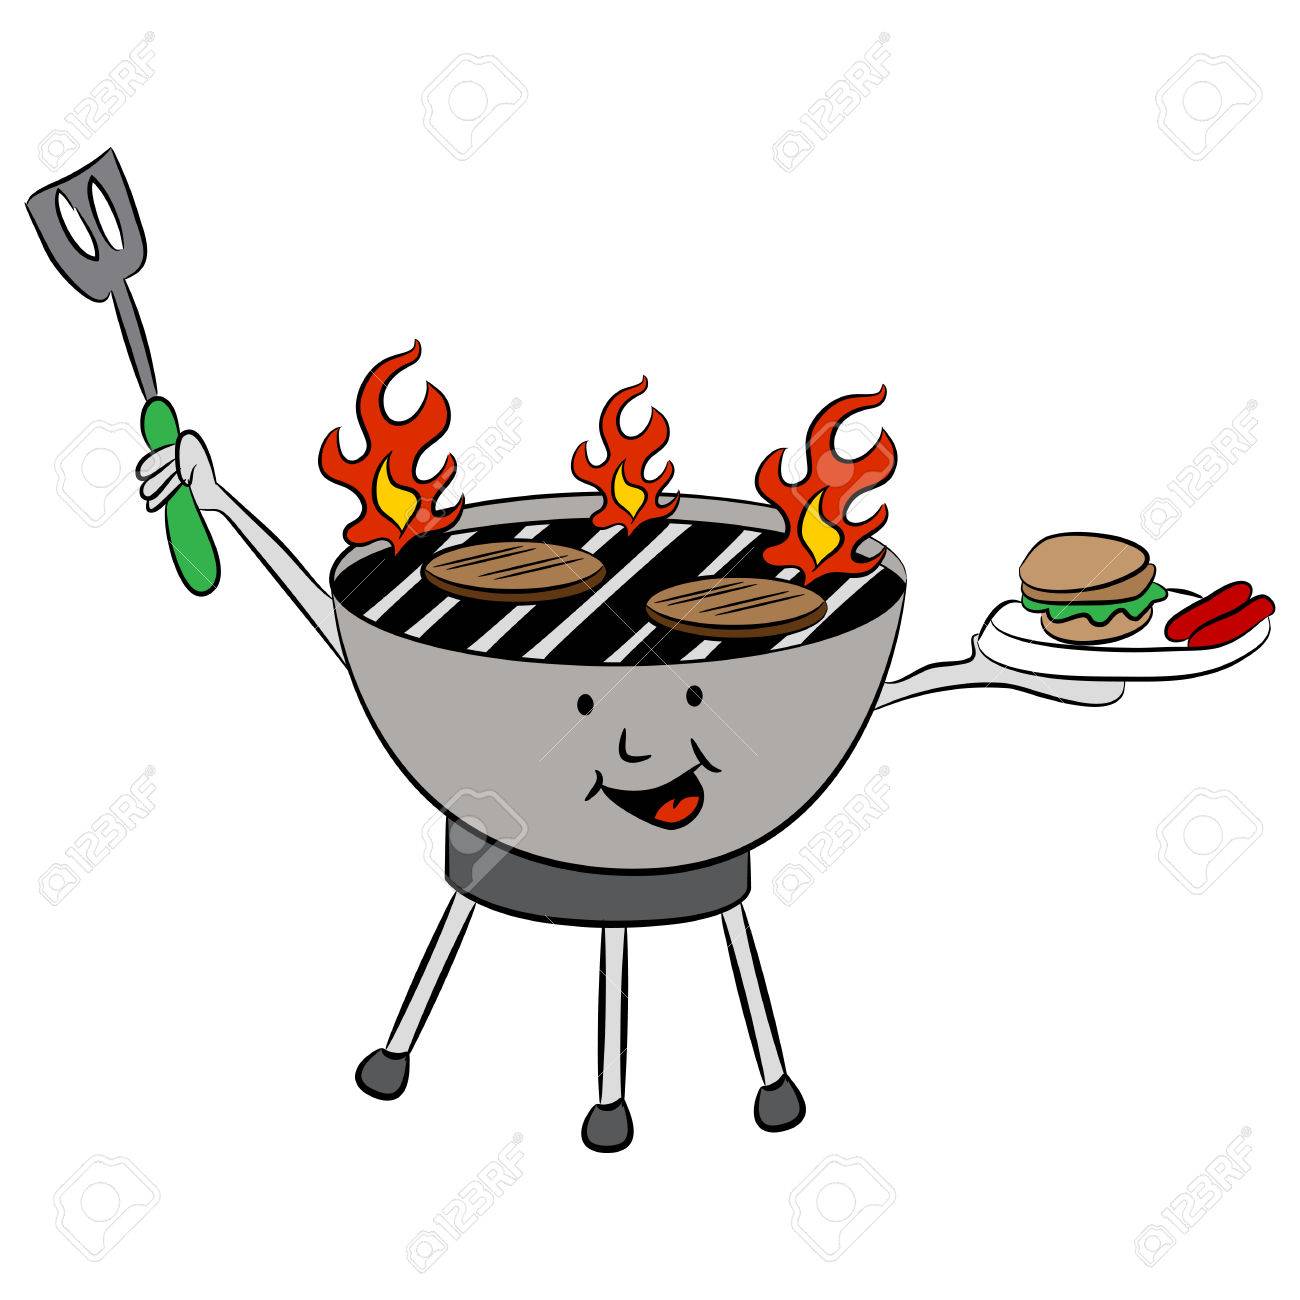 Barbecue clipart sign. Grill free download best